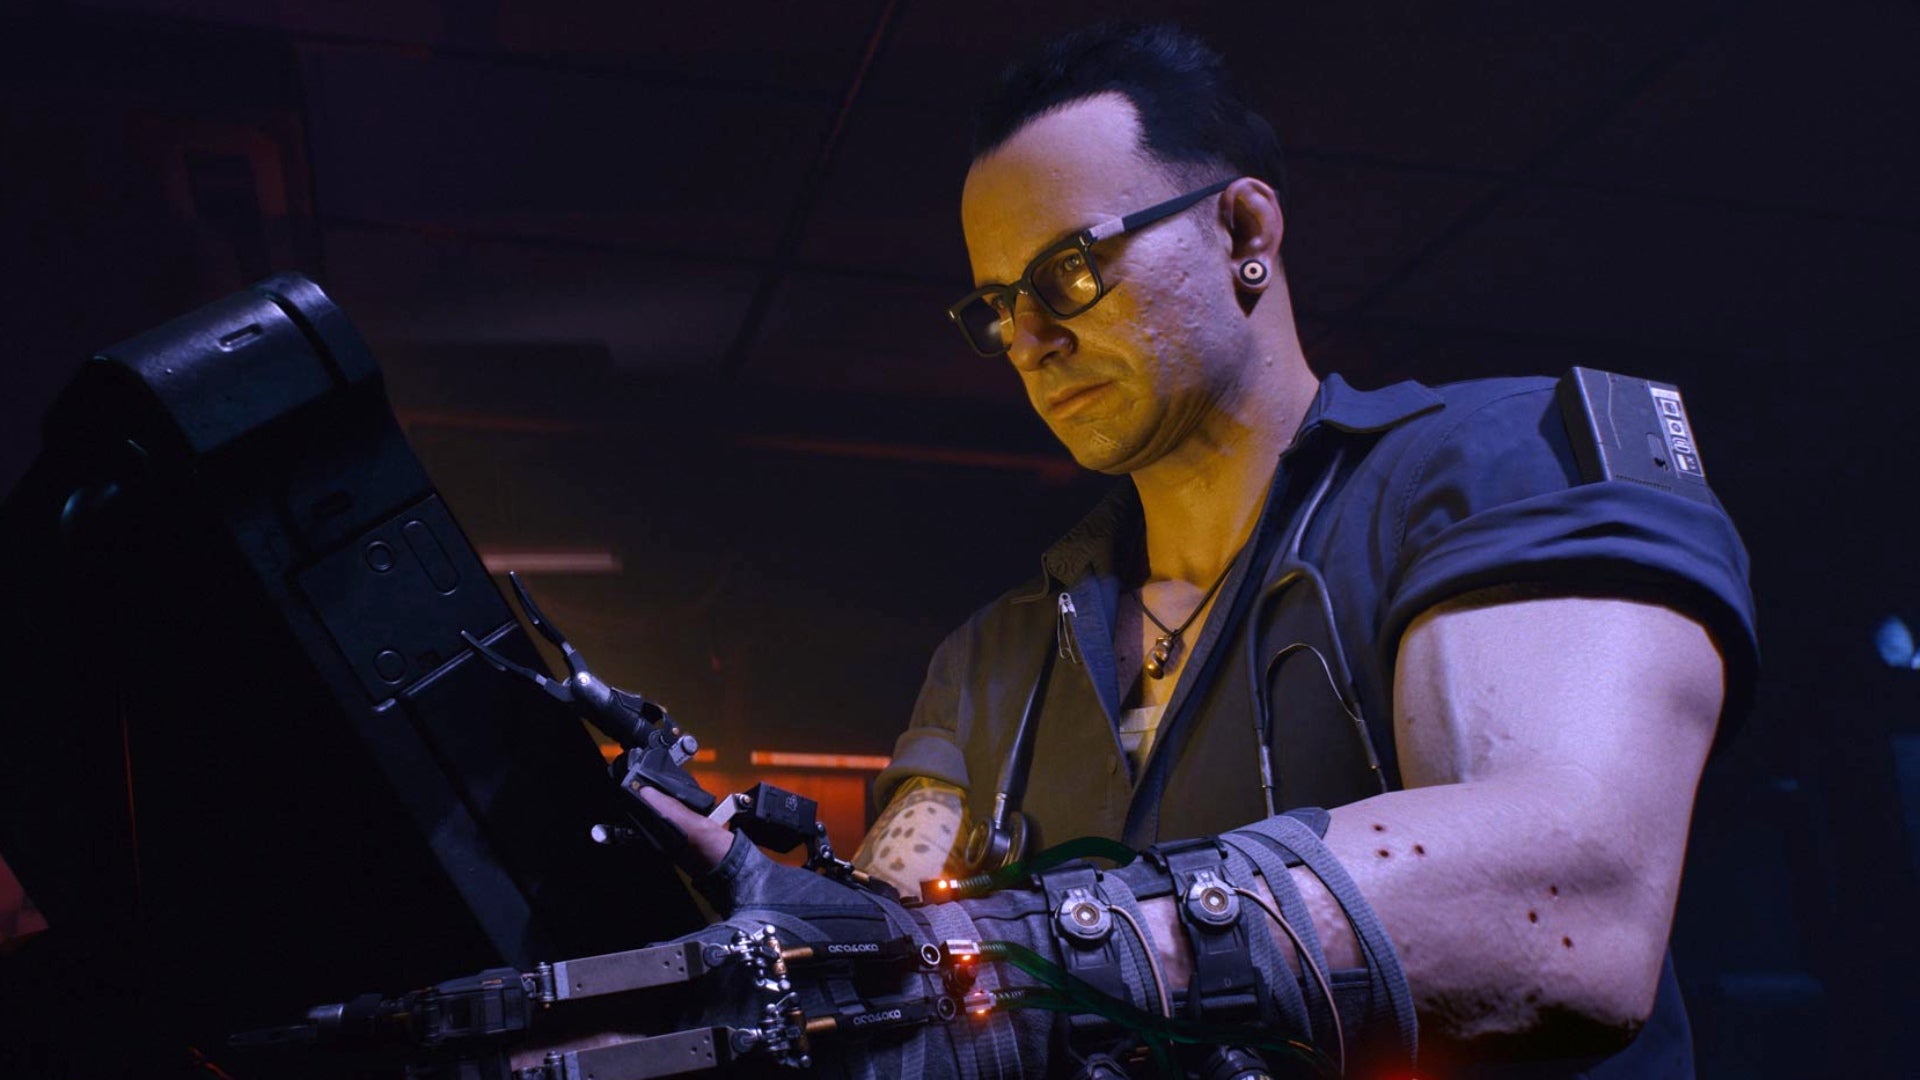 PS4 owners patiently waiting for Cyberpunk 2077 to work. (Screenshot: CD Projekt Red)